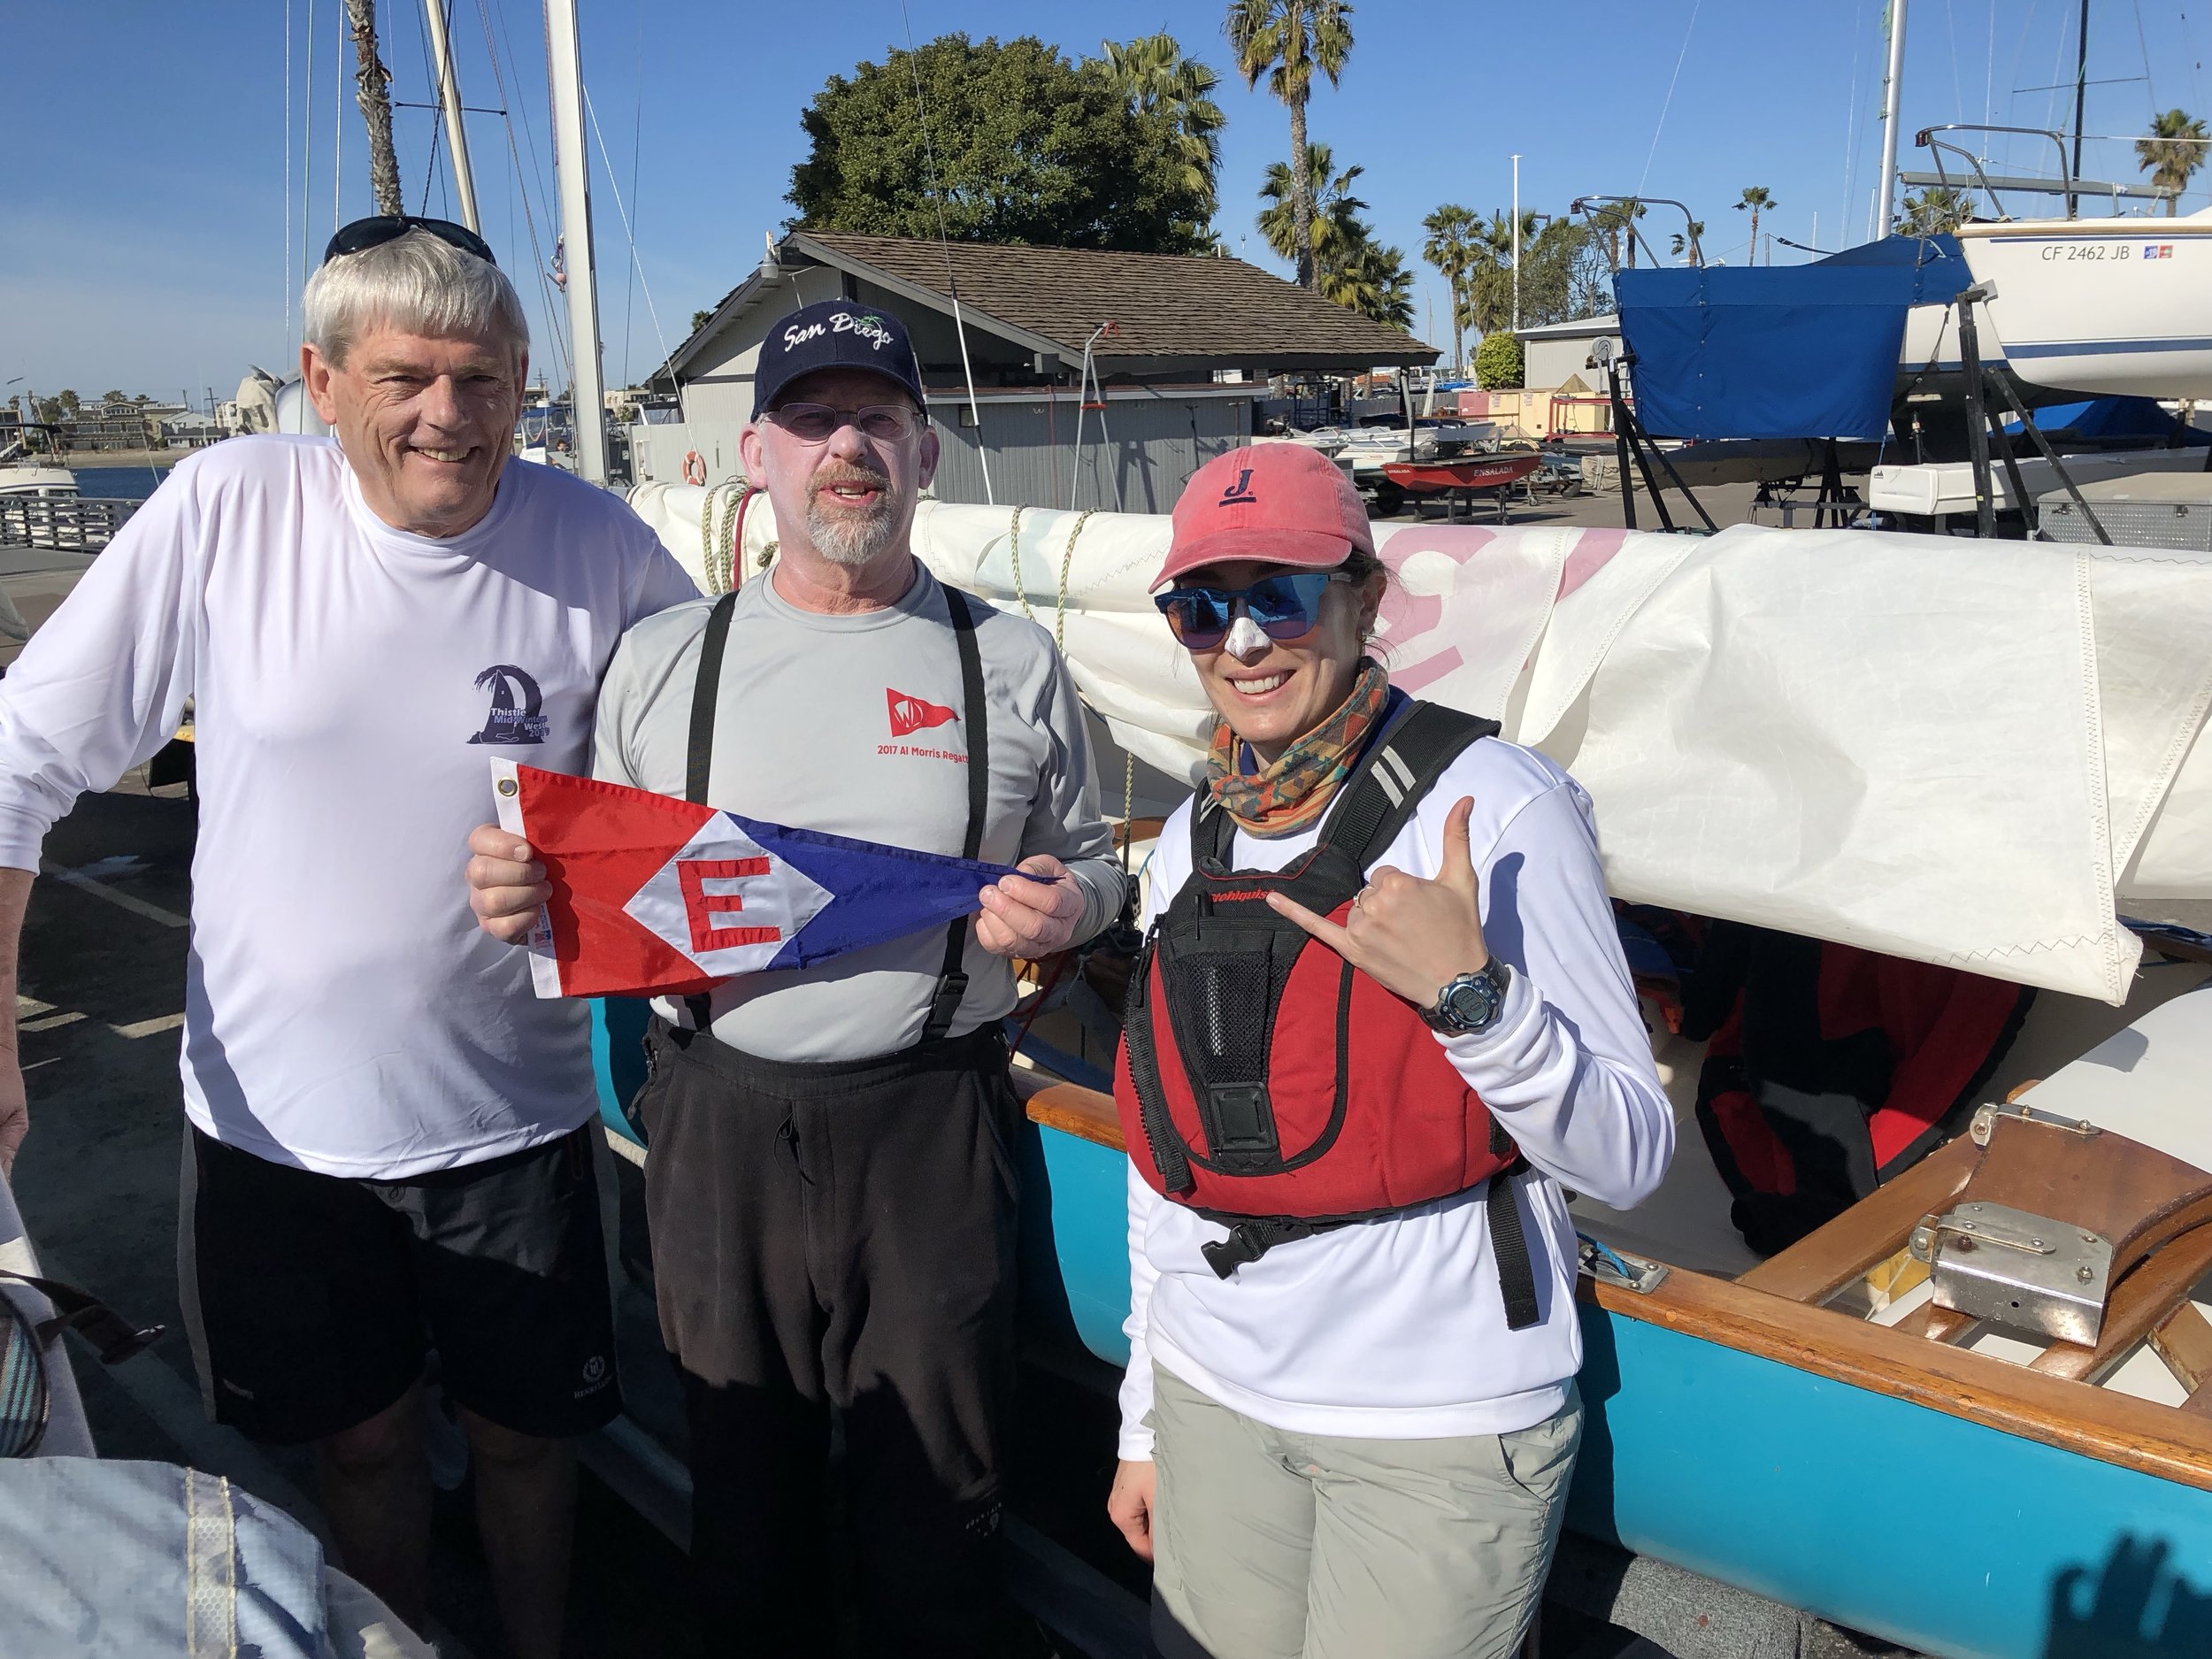  Evert, Chip, and Amanda hoisted the EYC burgee at this year’s Thistle MidWinters West 